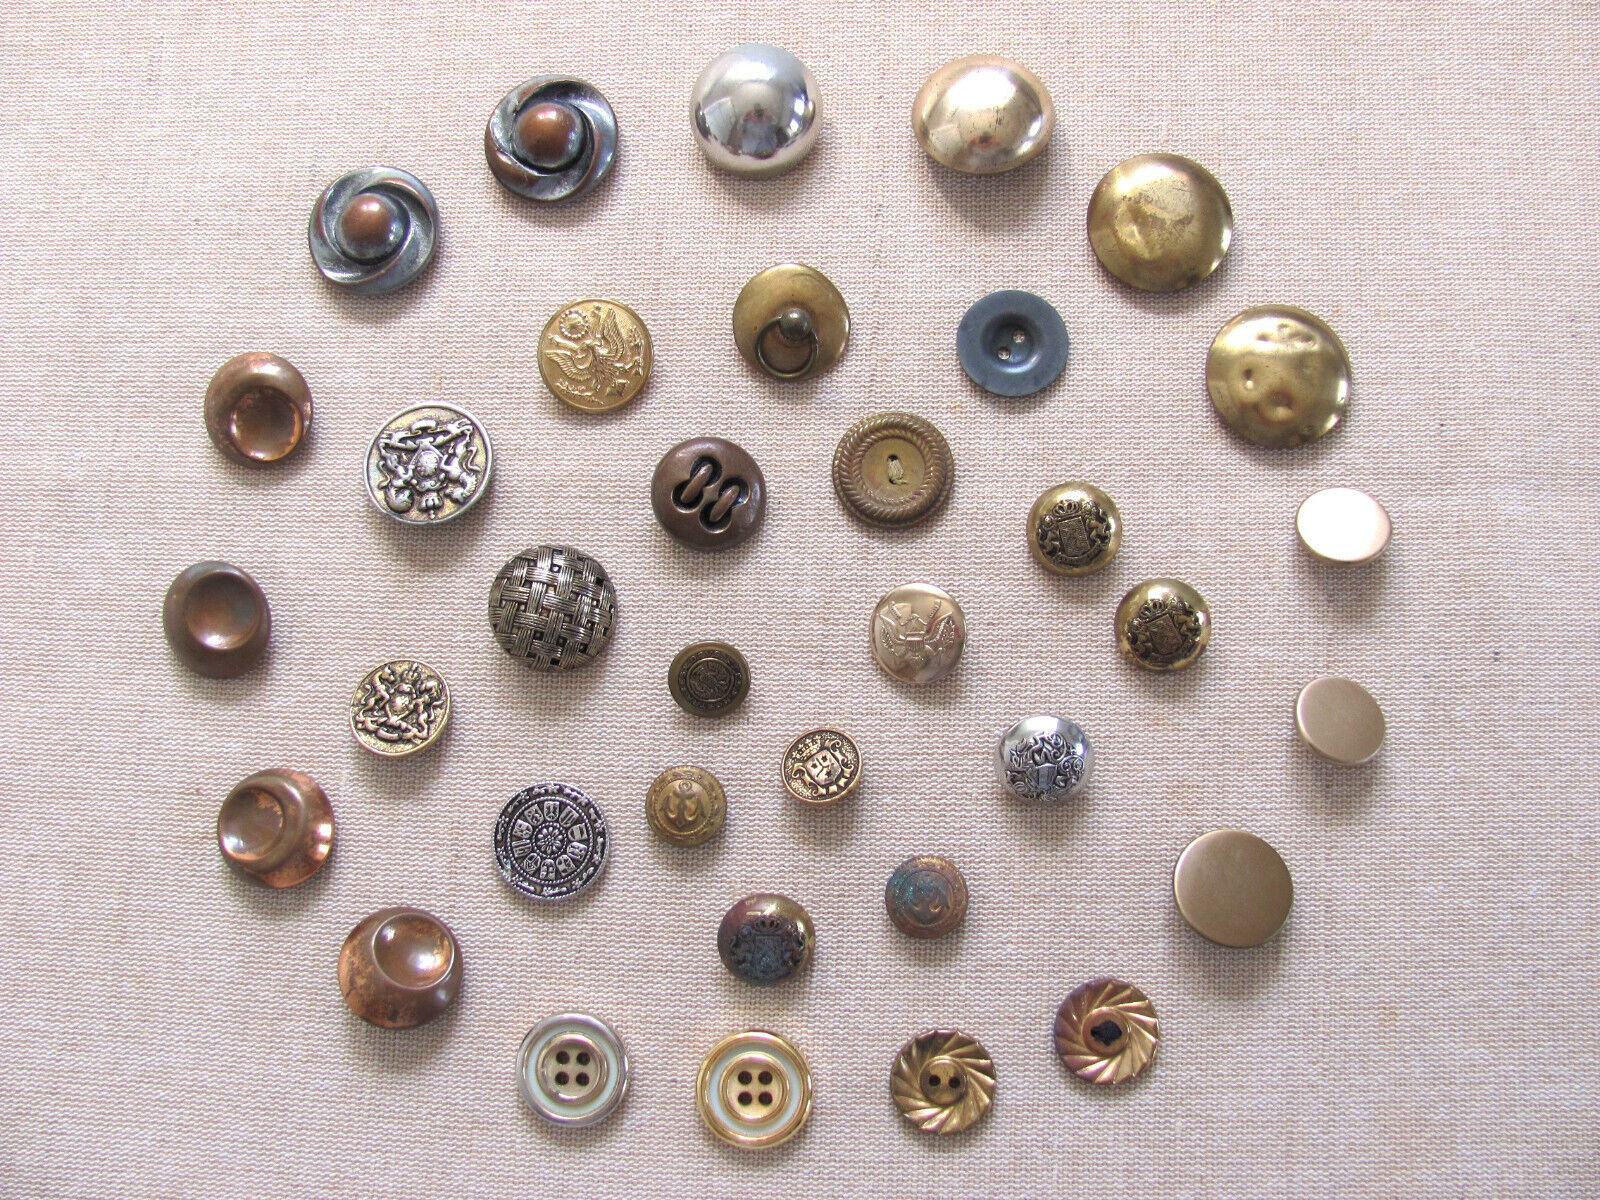 Vintage Metal Sewing Buttons Lot 35 Two Backmarked Lidz Button Sets Crests